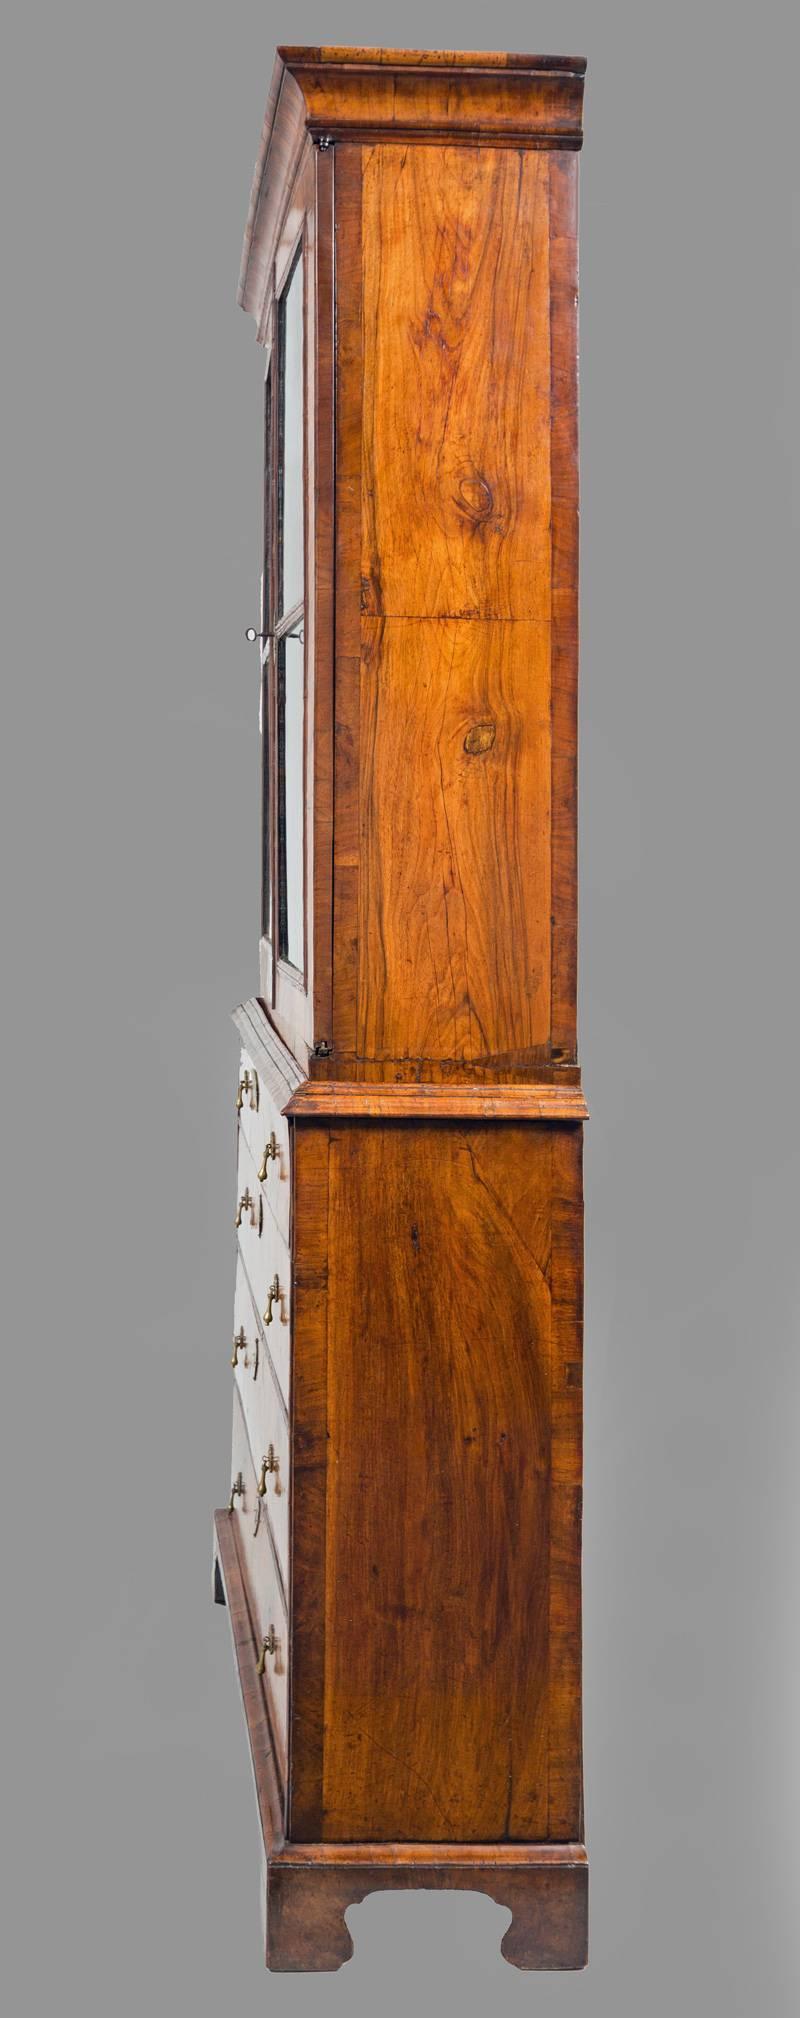 Early 18th Century Antique Period George I Walnut Secretaire Bookcase For Sale